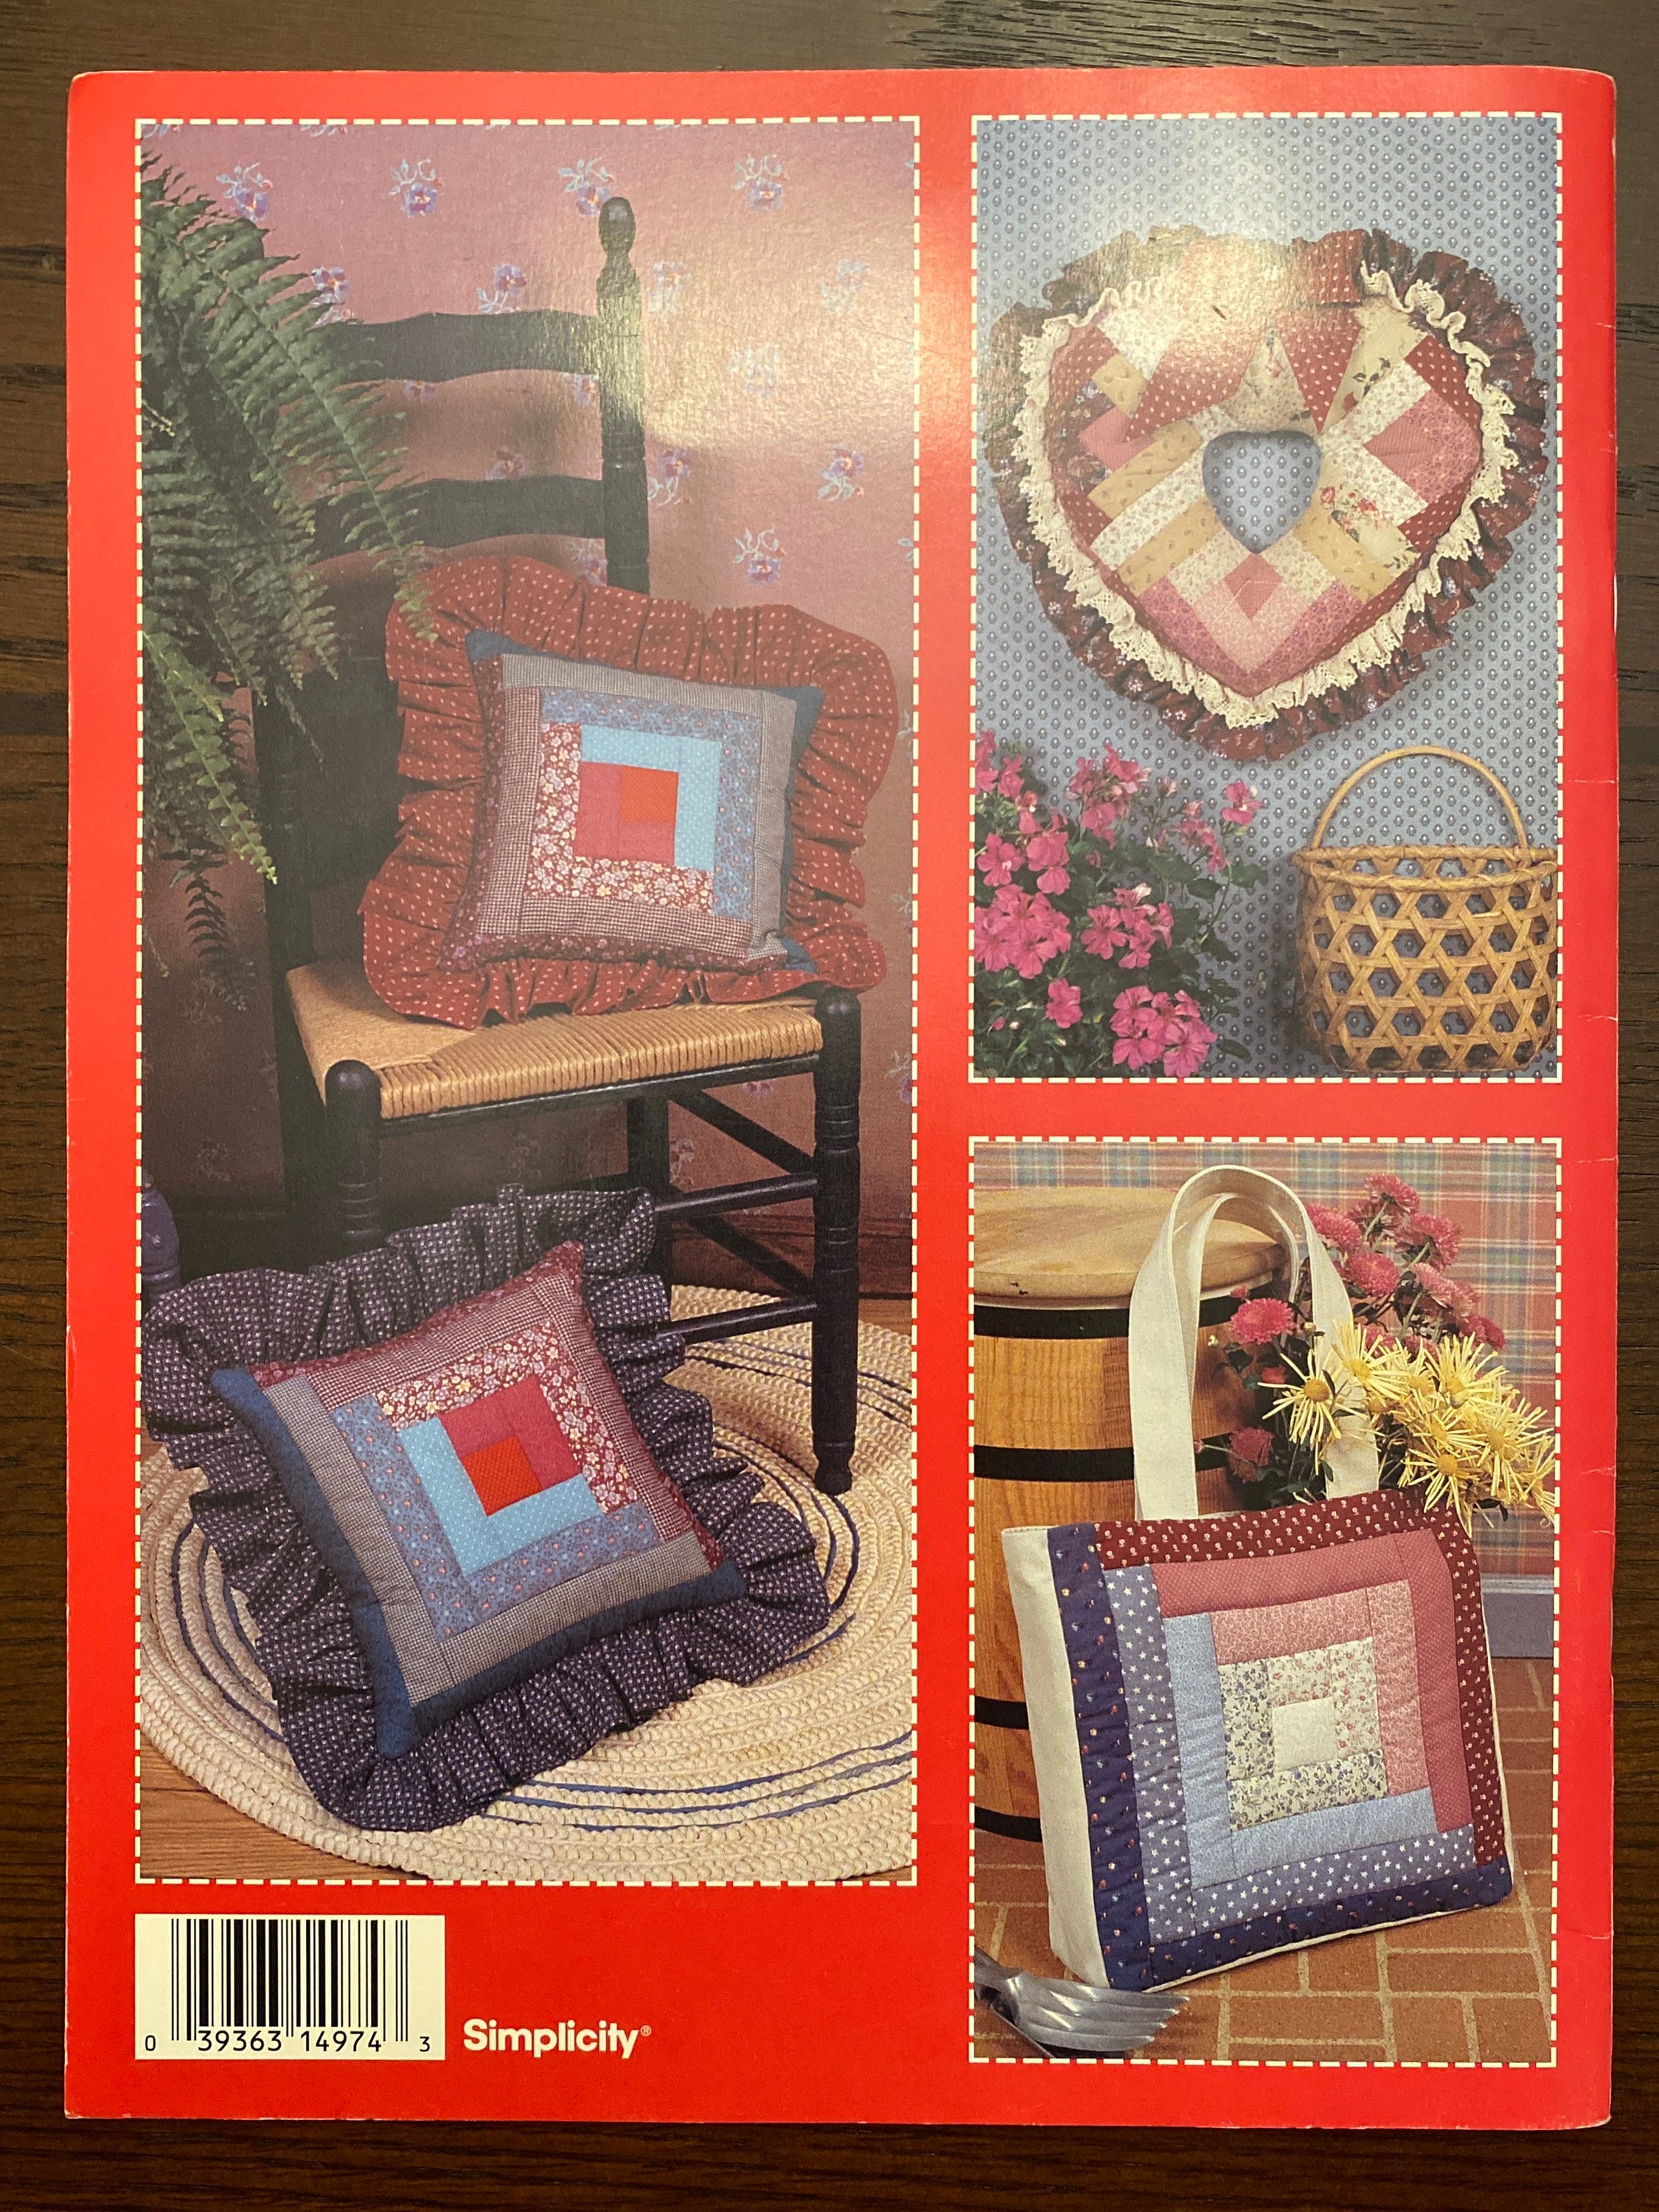 Quilts of America QUILTING BOOKS Quilt Designs Quilting History Reference  Book 